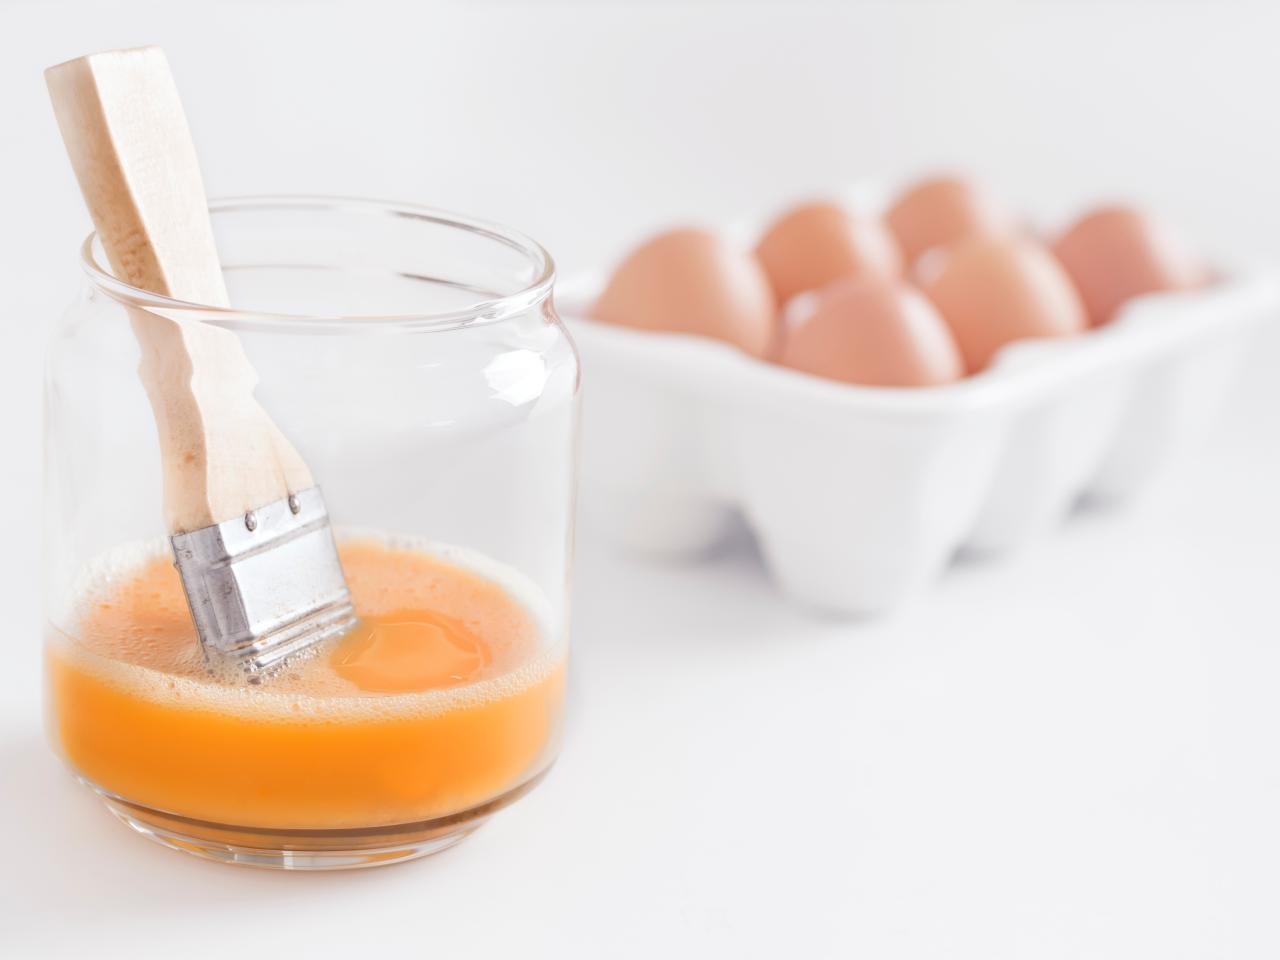 Egg Wash for Baking: The Who, What, Where, When, Why & How of Egg Wash, Cooking Tips